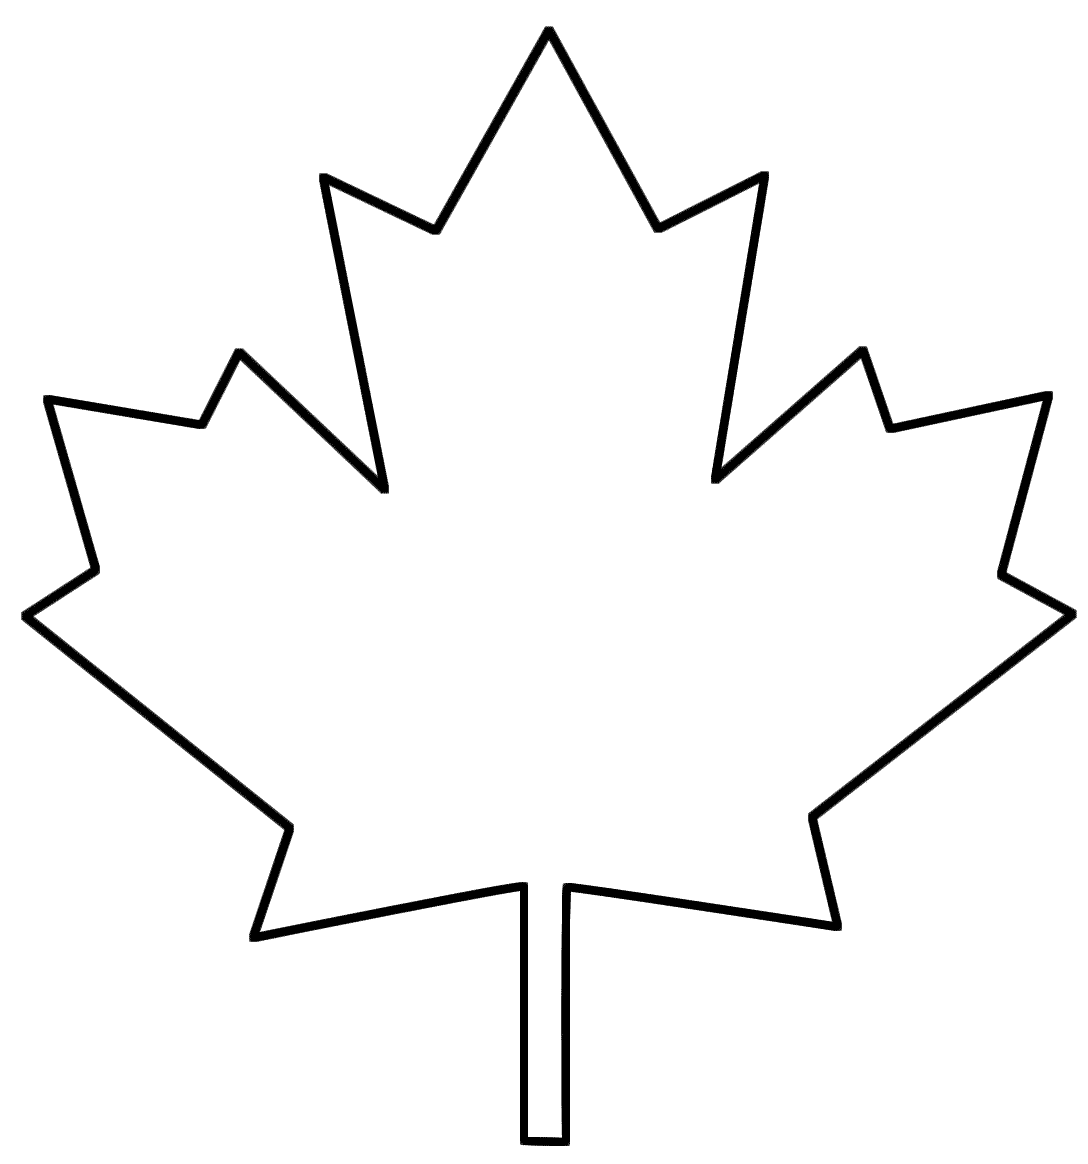 Maple Leaf coloring #18, Download drawings